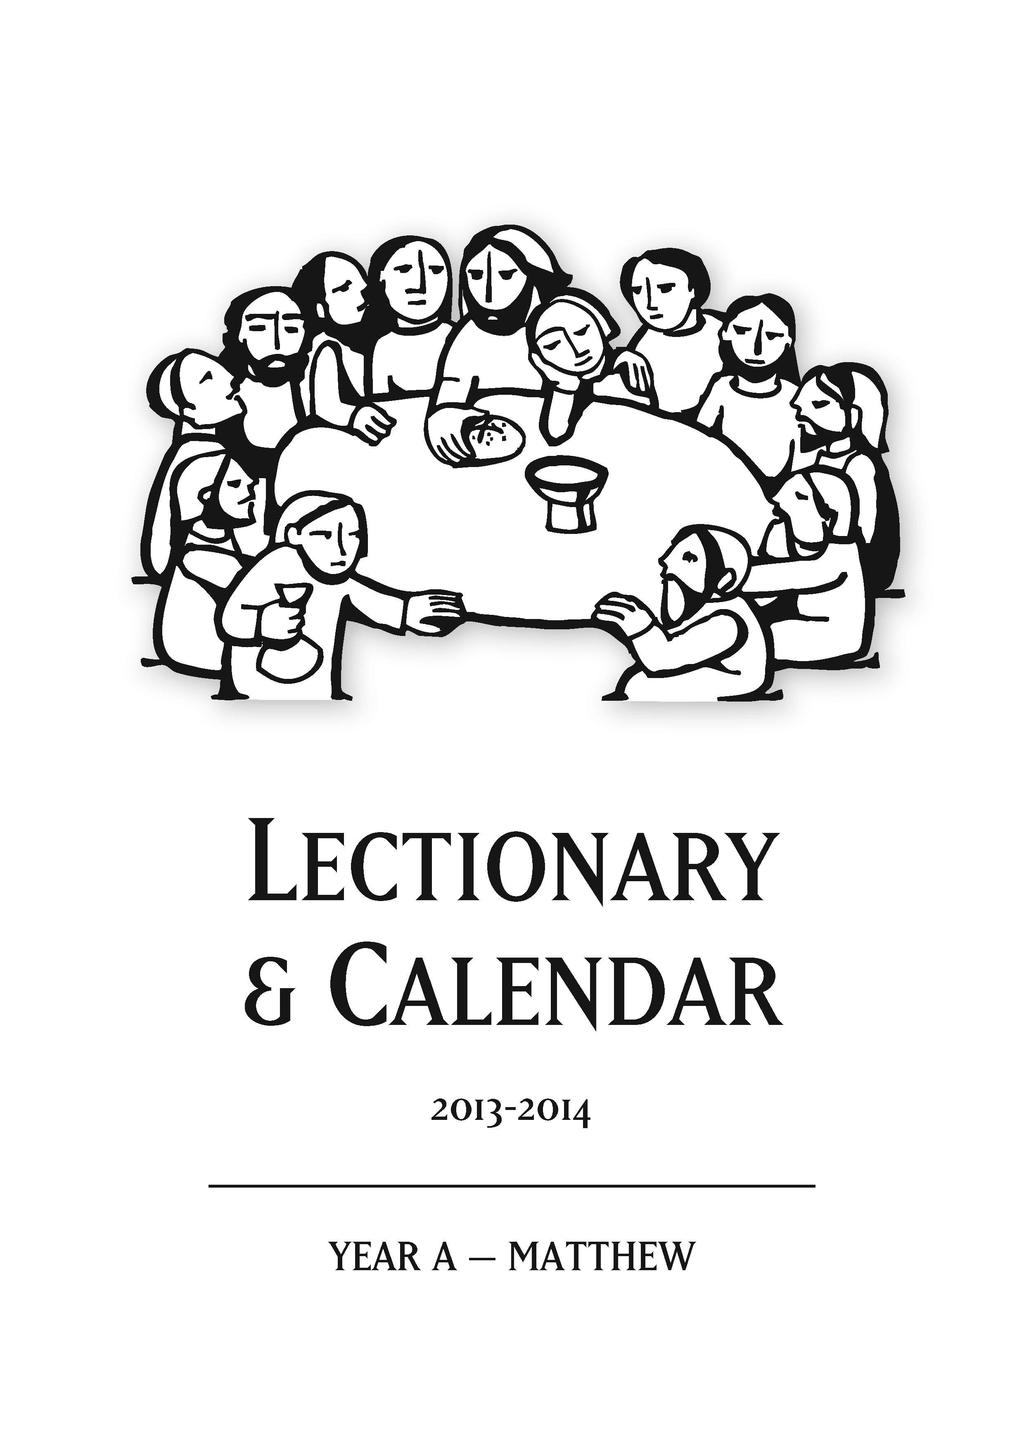 Copies of this Lectionary & Calendar are available from: Administration Division Resource Centre Methodist Church of New Zealand Presbyterian Church of Te Hāhi eteriana O Aotearoa Aotearoa / New